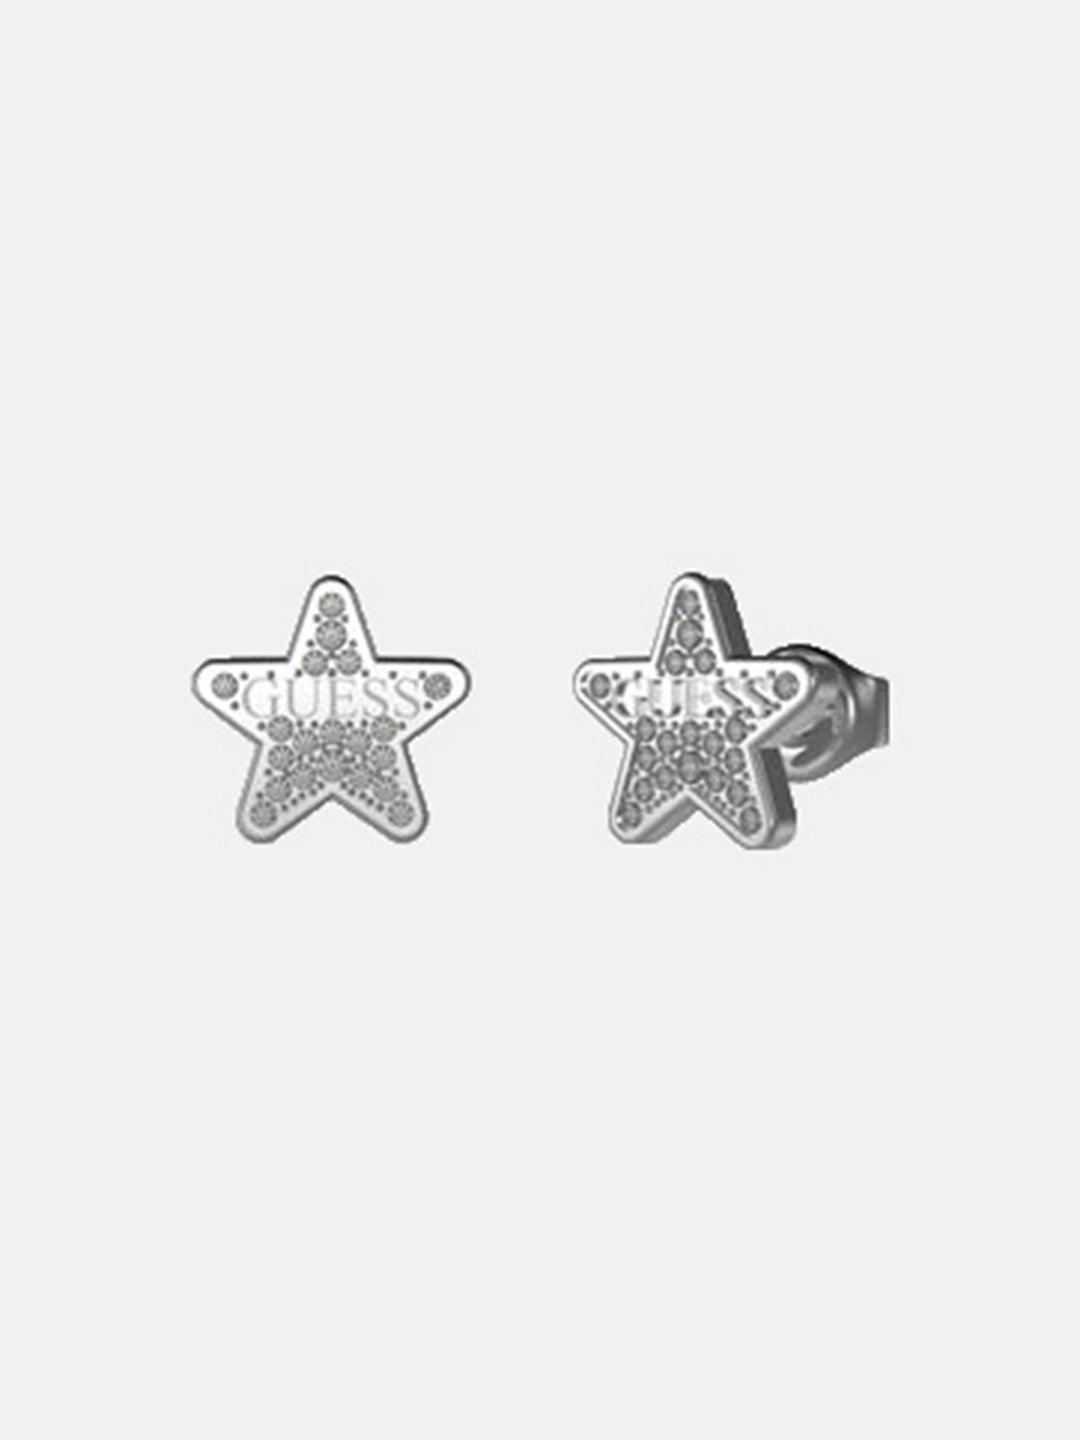 STUD EARRINGS - STUDS PARTY - Guess